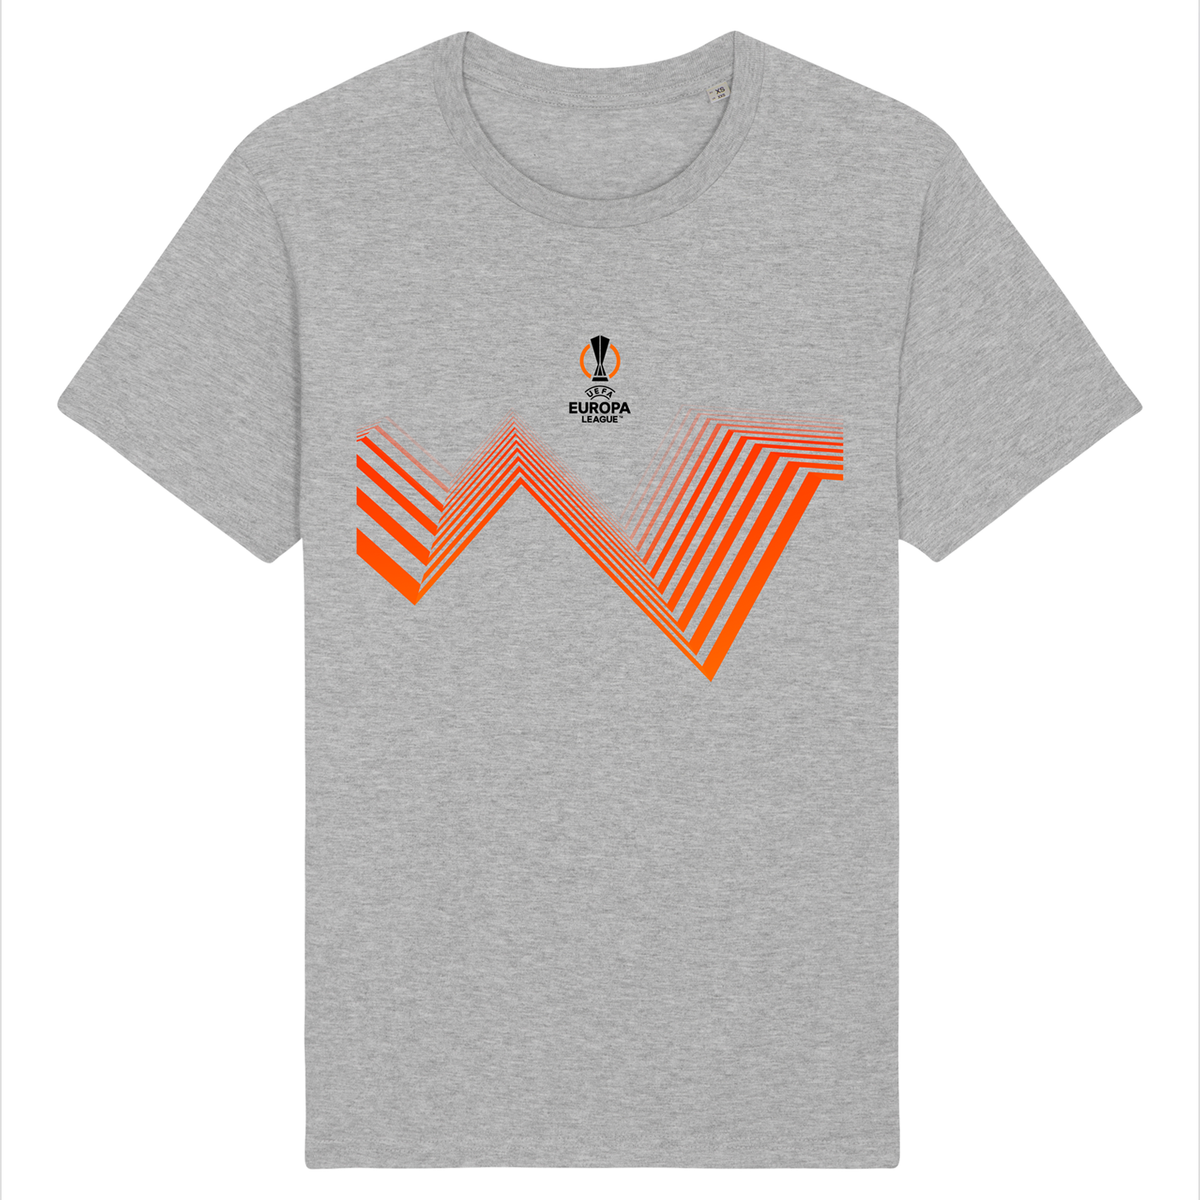 UEFA Europa League - Energy Wave Grey T-Shirt UEFA Club Competitions Online Store